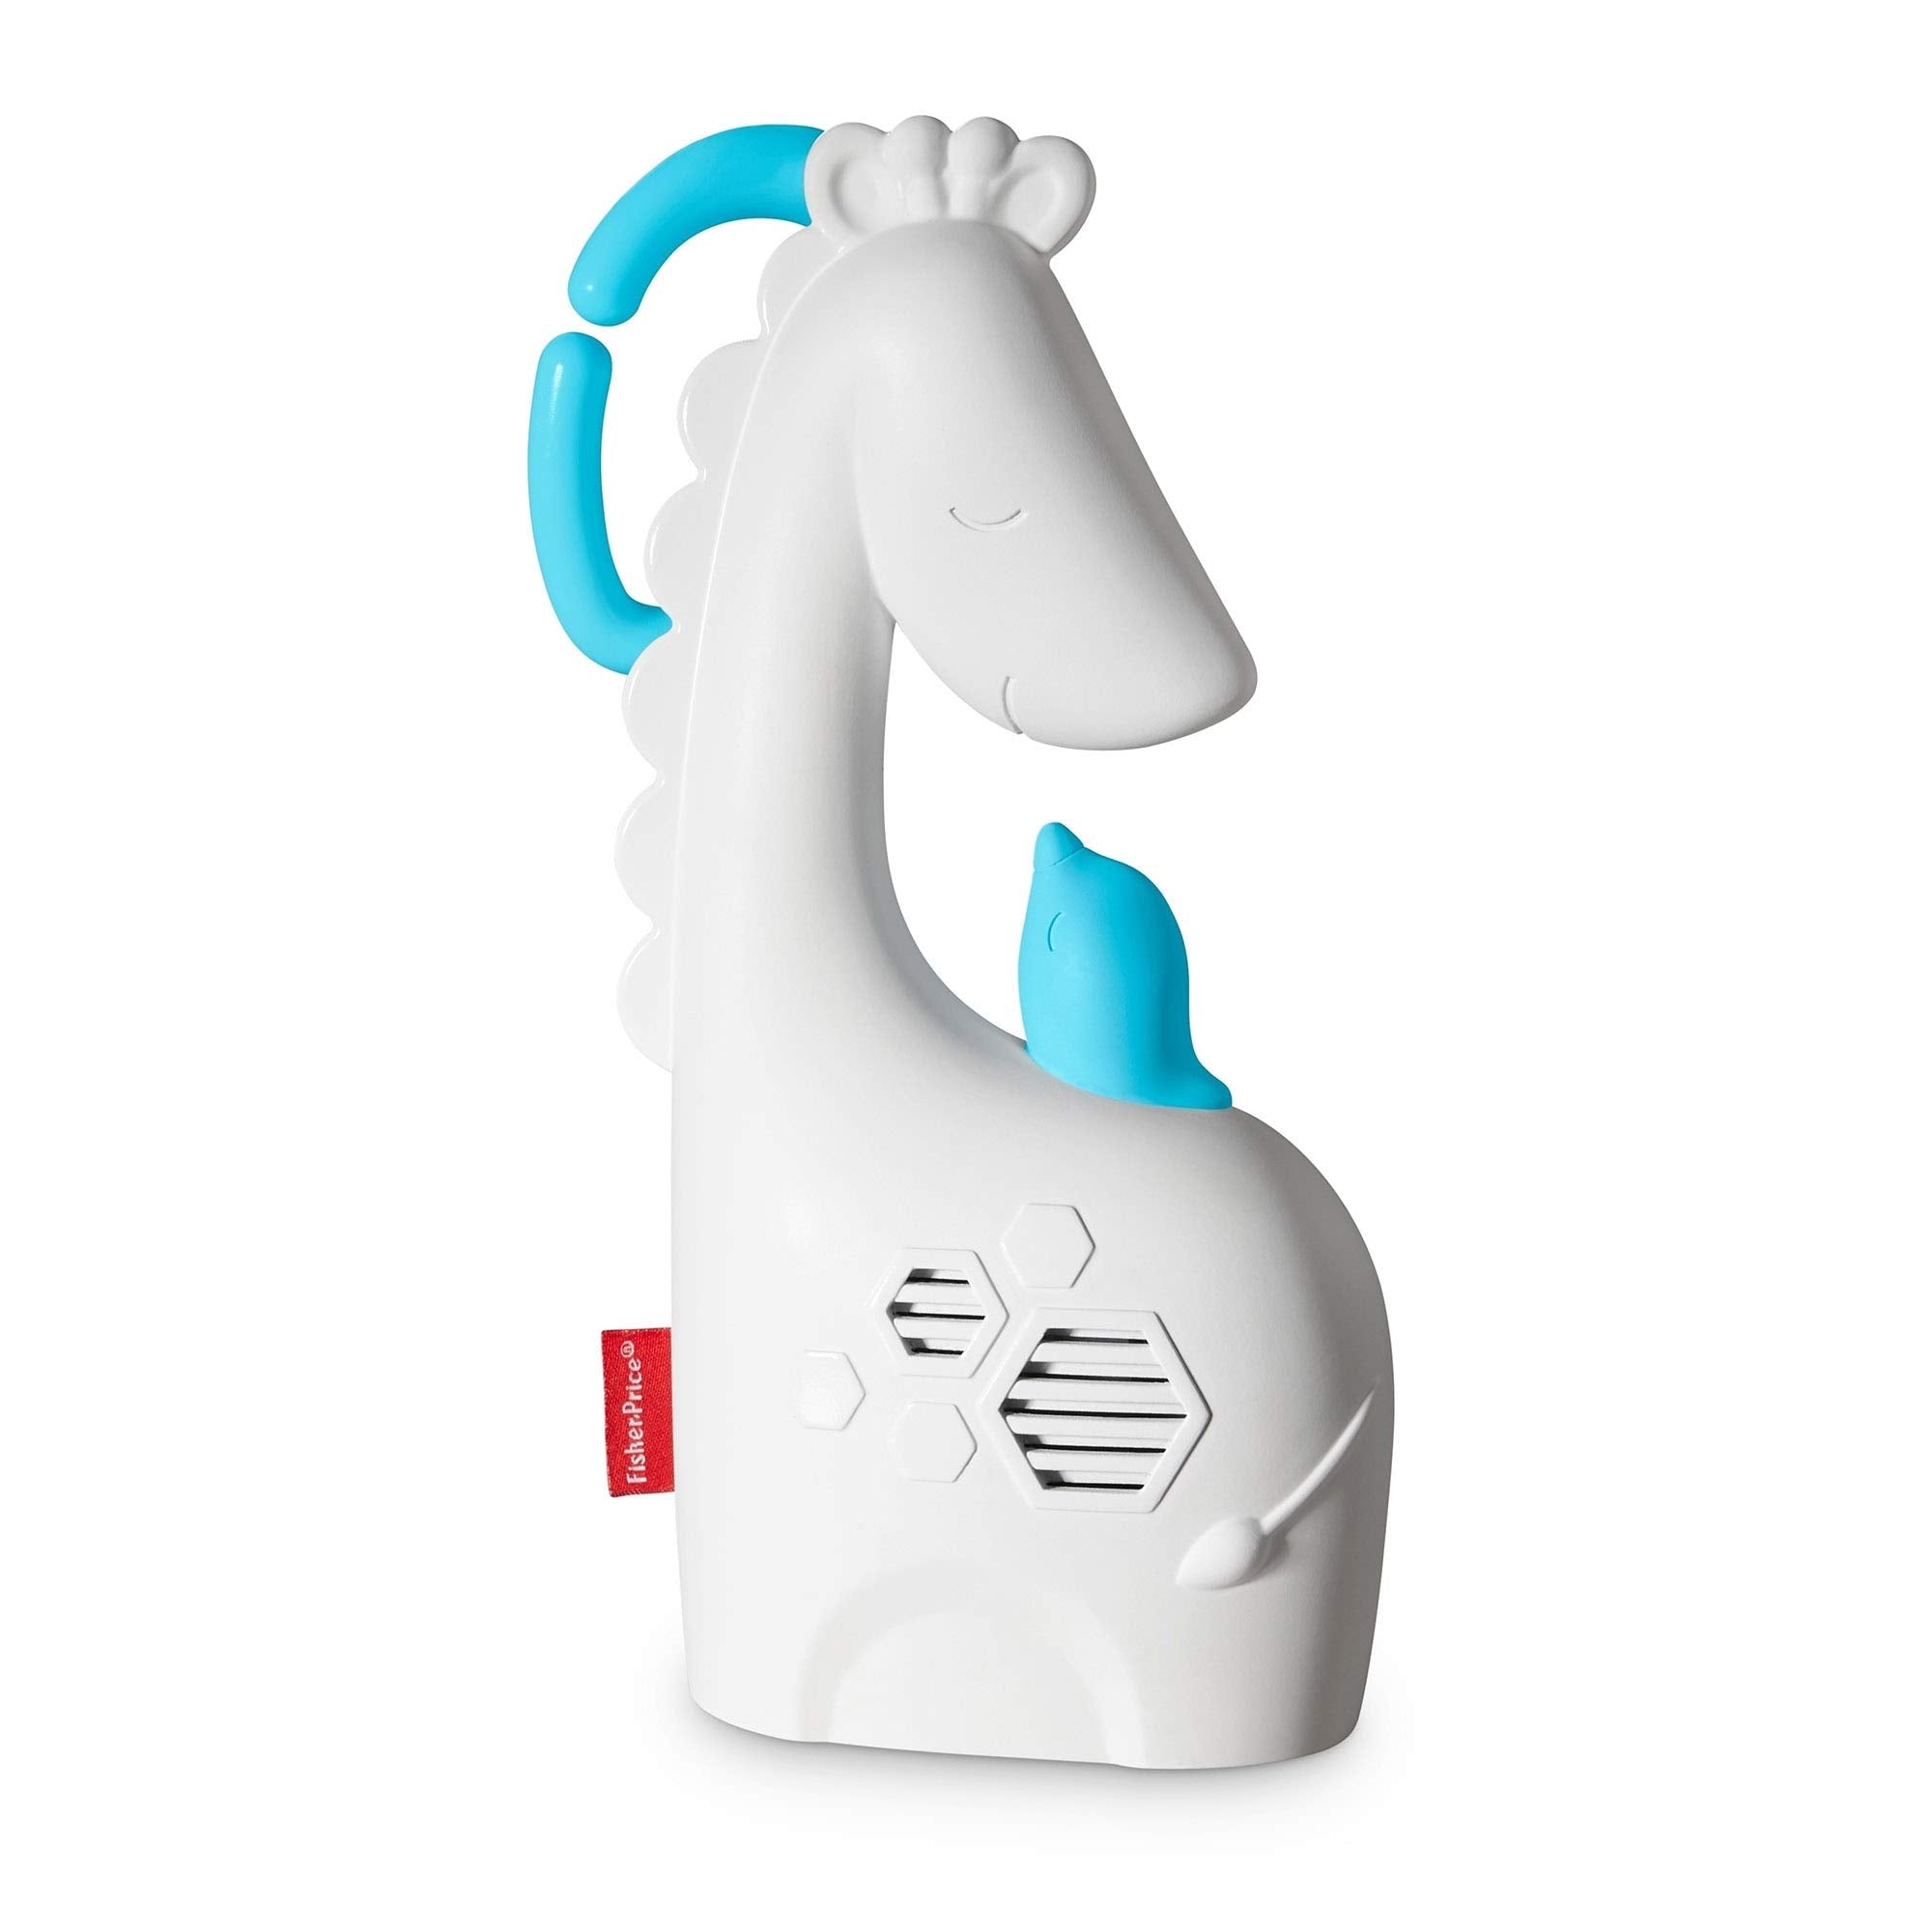 Fisher-Price Soothe and Go Giraffe, New-born On the Go Soothing Toy with Music, Sounds and White Noise, Suitable from Birth